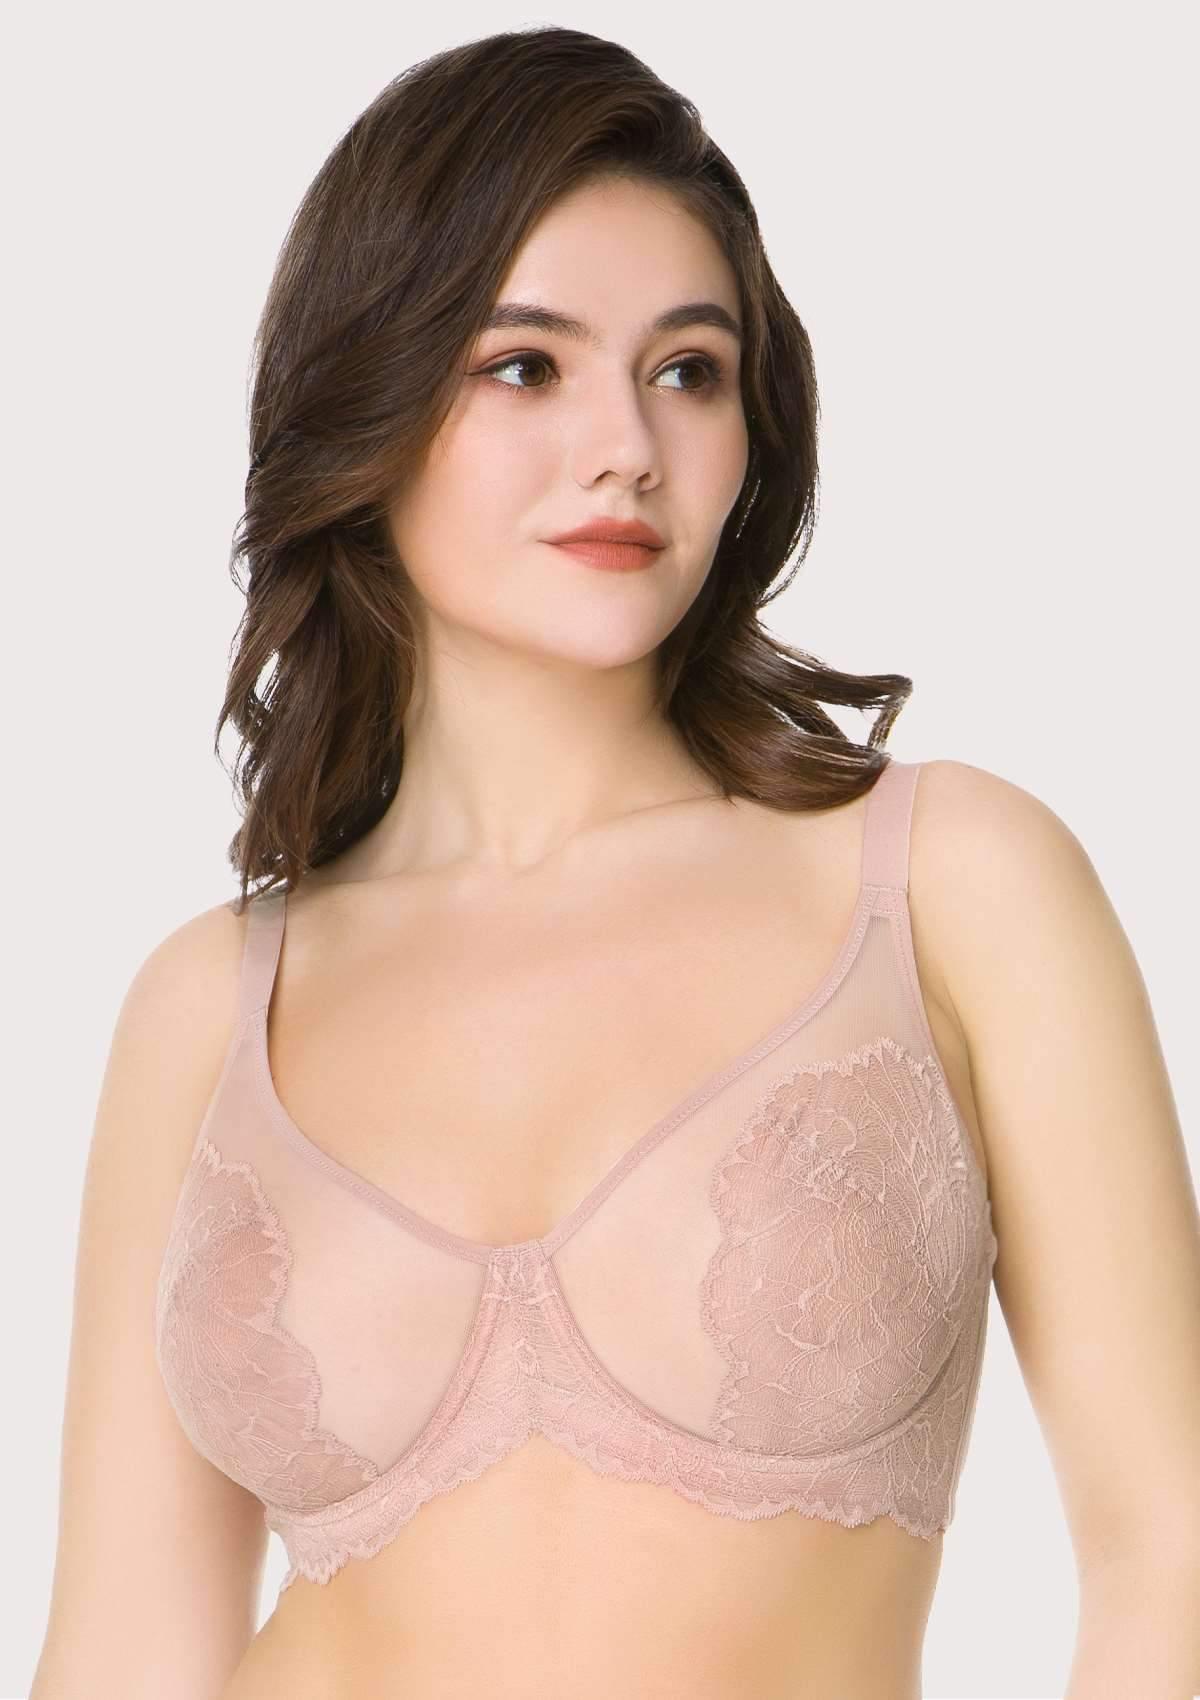 HSIA Blossom Lace Bra And Panties Set: Best Bra For Large Busts - Dark Pink / 36 / C